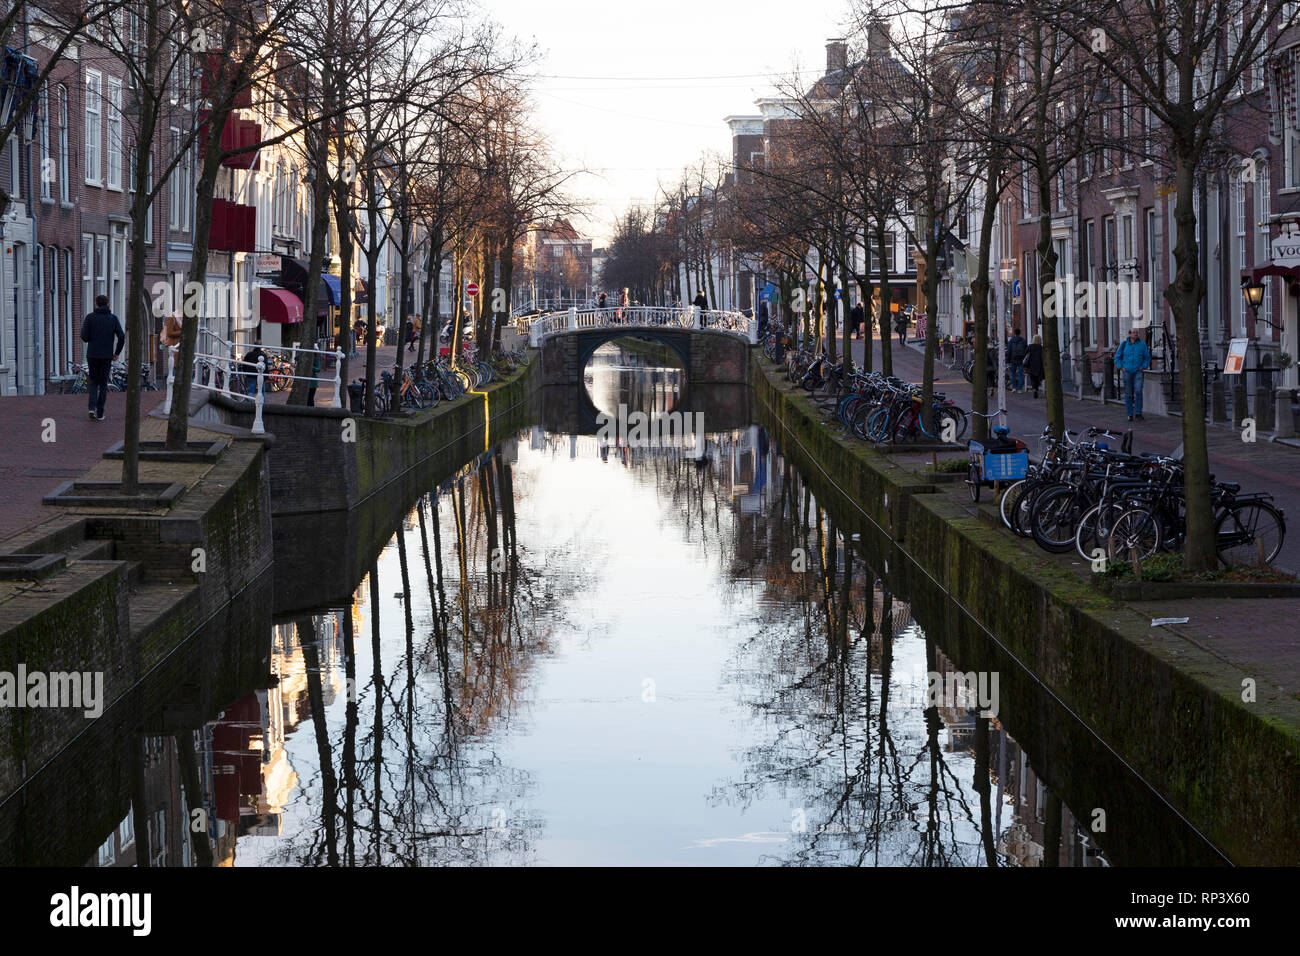 A birdge over the Oude Delft canal in Delft, the Netherlands. The canal is the oldest in the city. Stock Photo